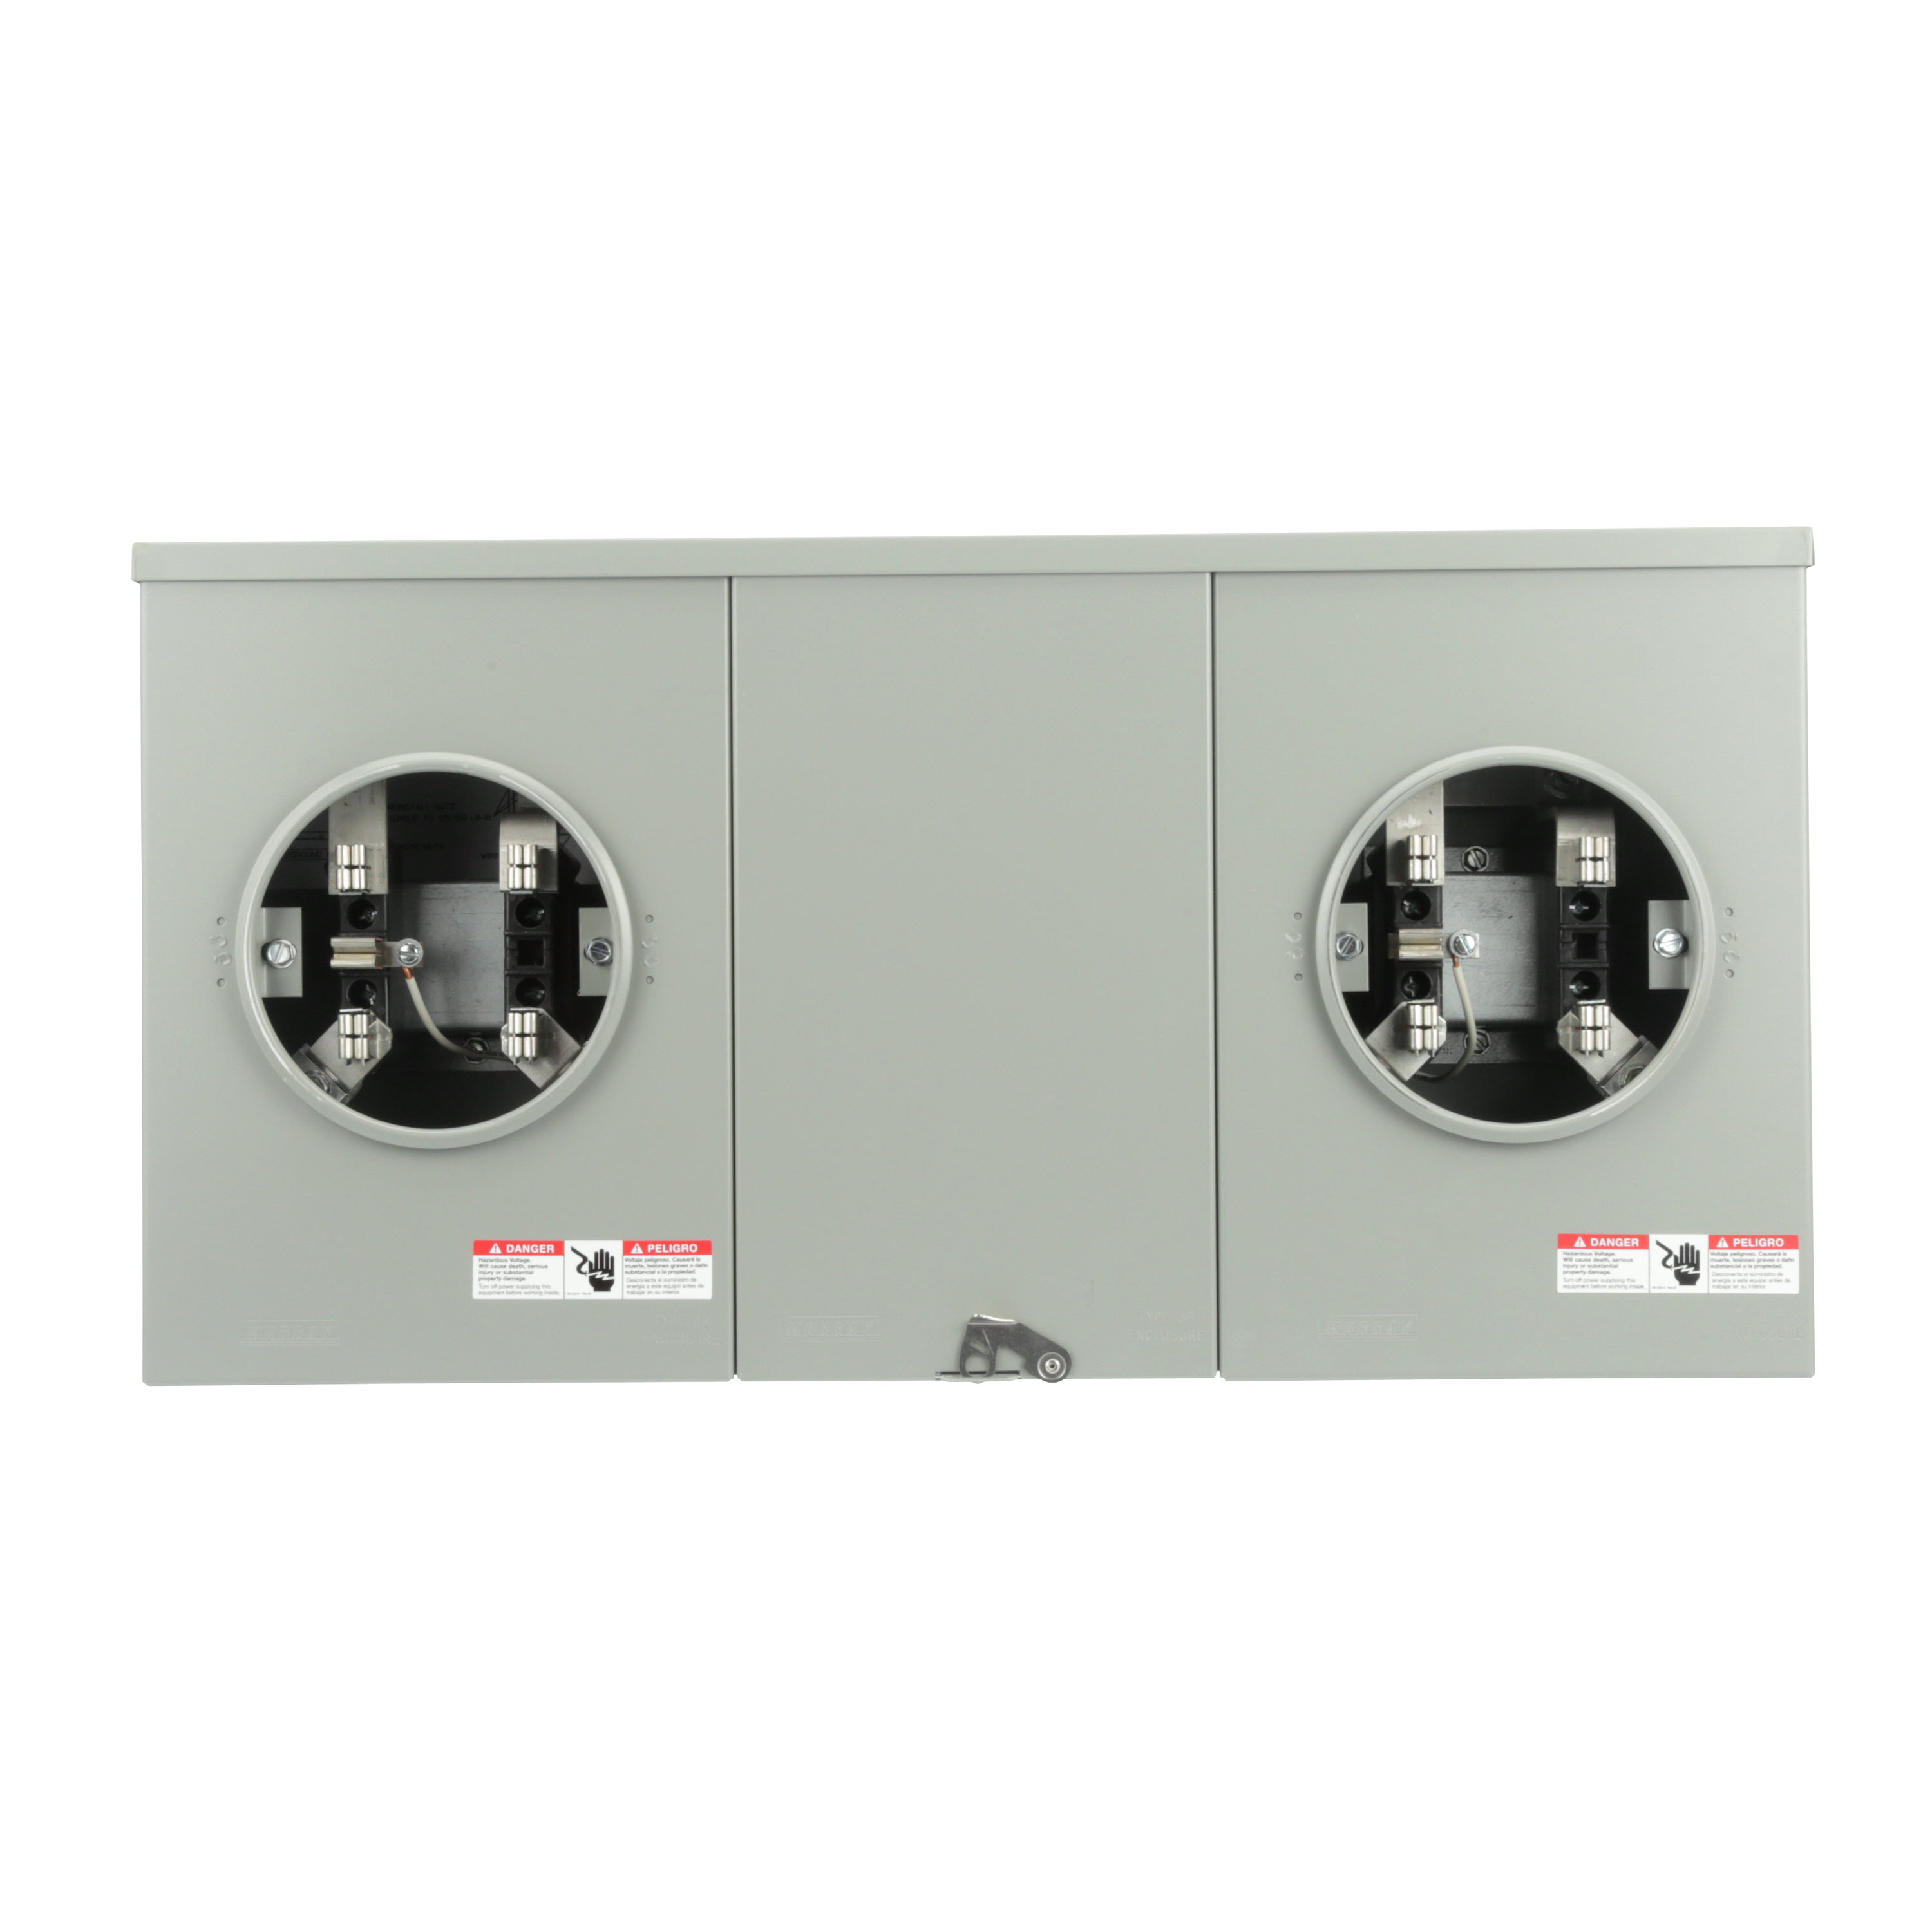 Siemens Low Voltage Talon Meter Sockets Residential - Talon Meter Sockets UAS8/9 Aluminum are Residential Enclosures Single-Family M etering. Type UAS8/9 Features NO BYPASS Application RESIDENTIAL Std UL V. Rating 300V A. Rating 200A PhaseSINGLE PHASE Size 15.0 x 7.0 x 29.0 No Of Cutouts 9 Cutout Size 6 x (1, 1-1/4, 1-1/2, 2, 2-1/2), 1 x (2, 2-1/2, 3), 1 x 1/2, 1 x 4.281 Cable Entry OH/UG Terminals 4. Surface mounting. Operating Temperature Avg AMBIENT Enclosure AL